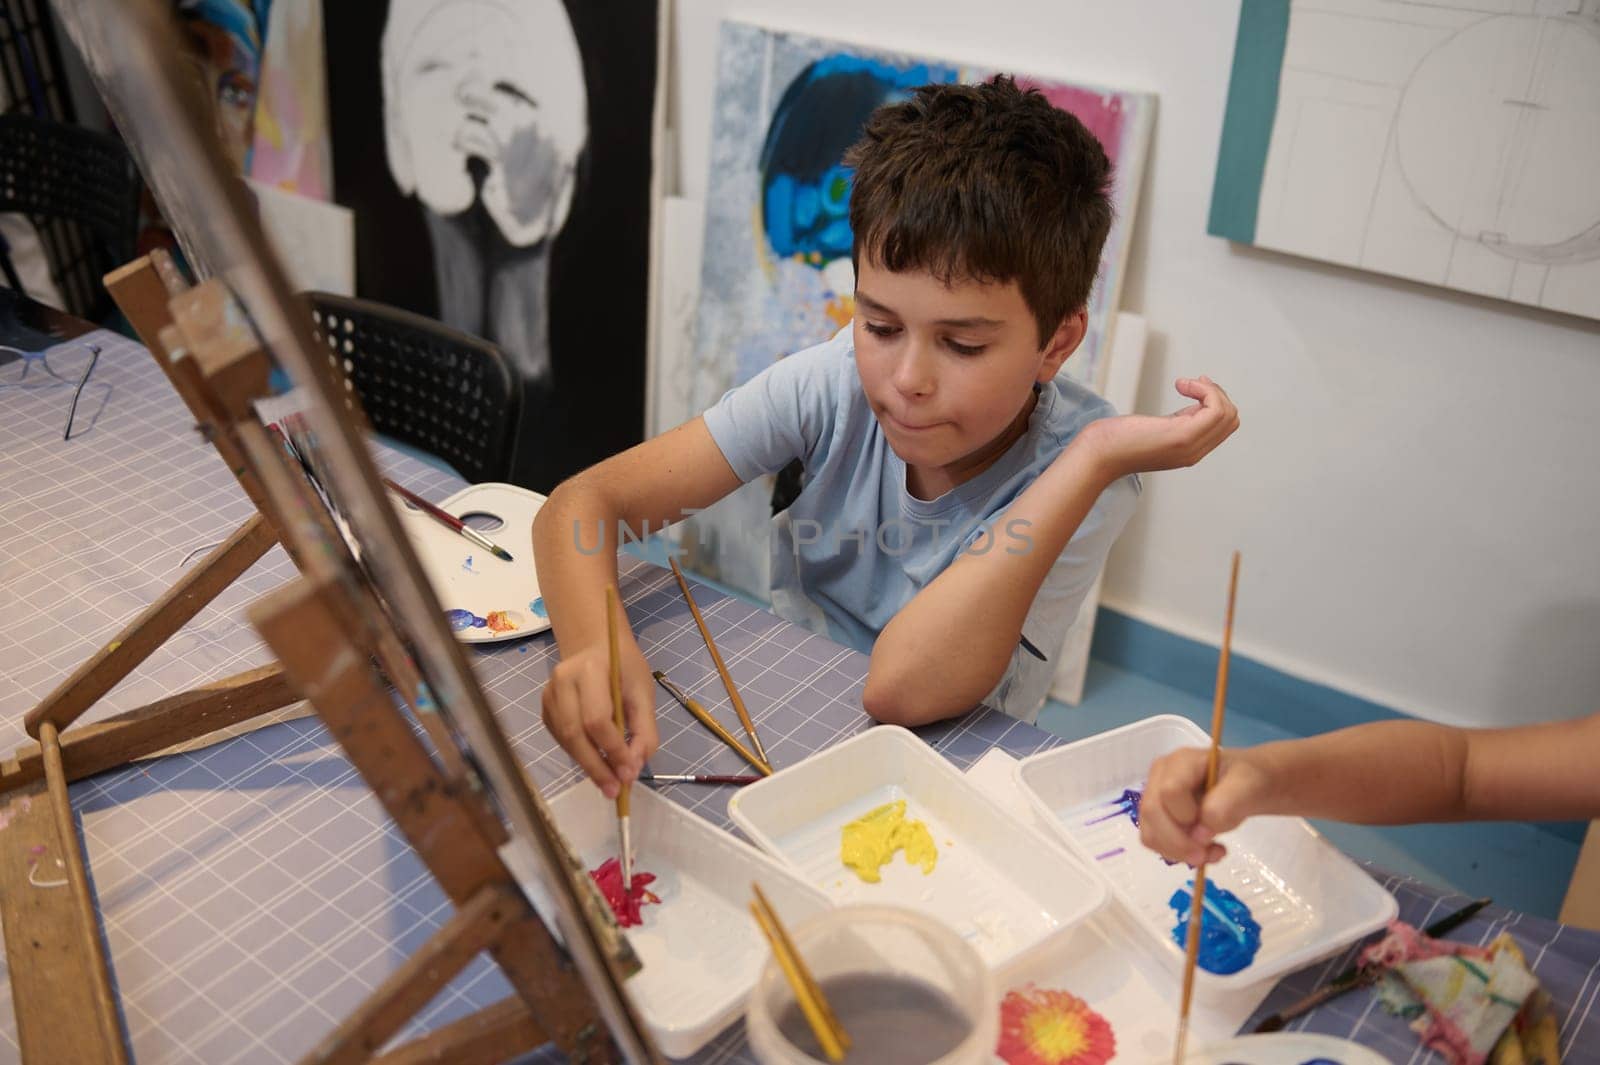 Authentic confident happy teenage boy, elementary age school student paints picture during creative art and craft class by artgf